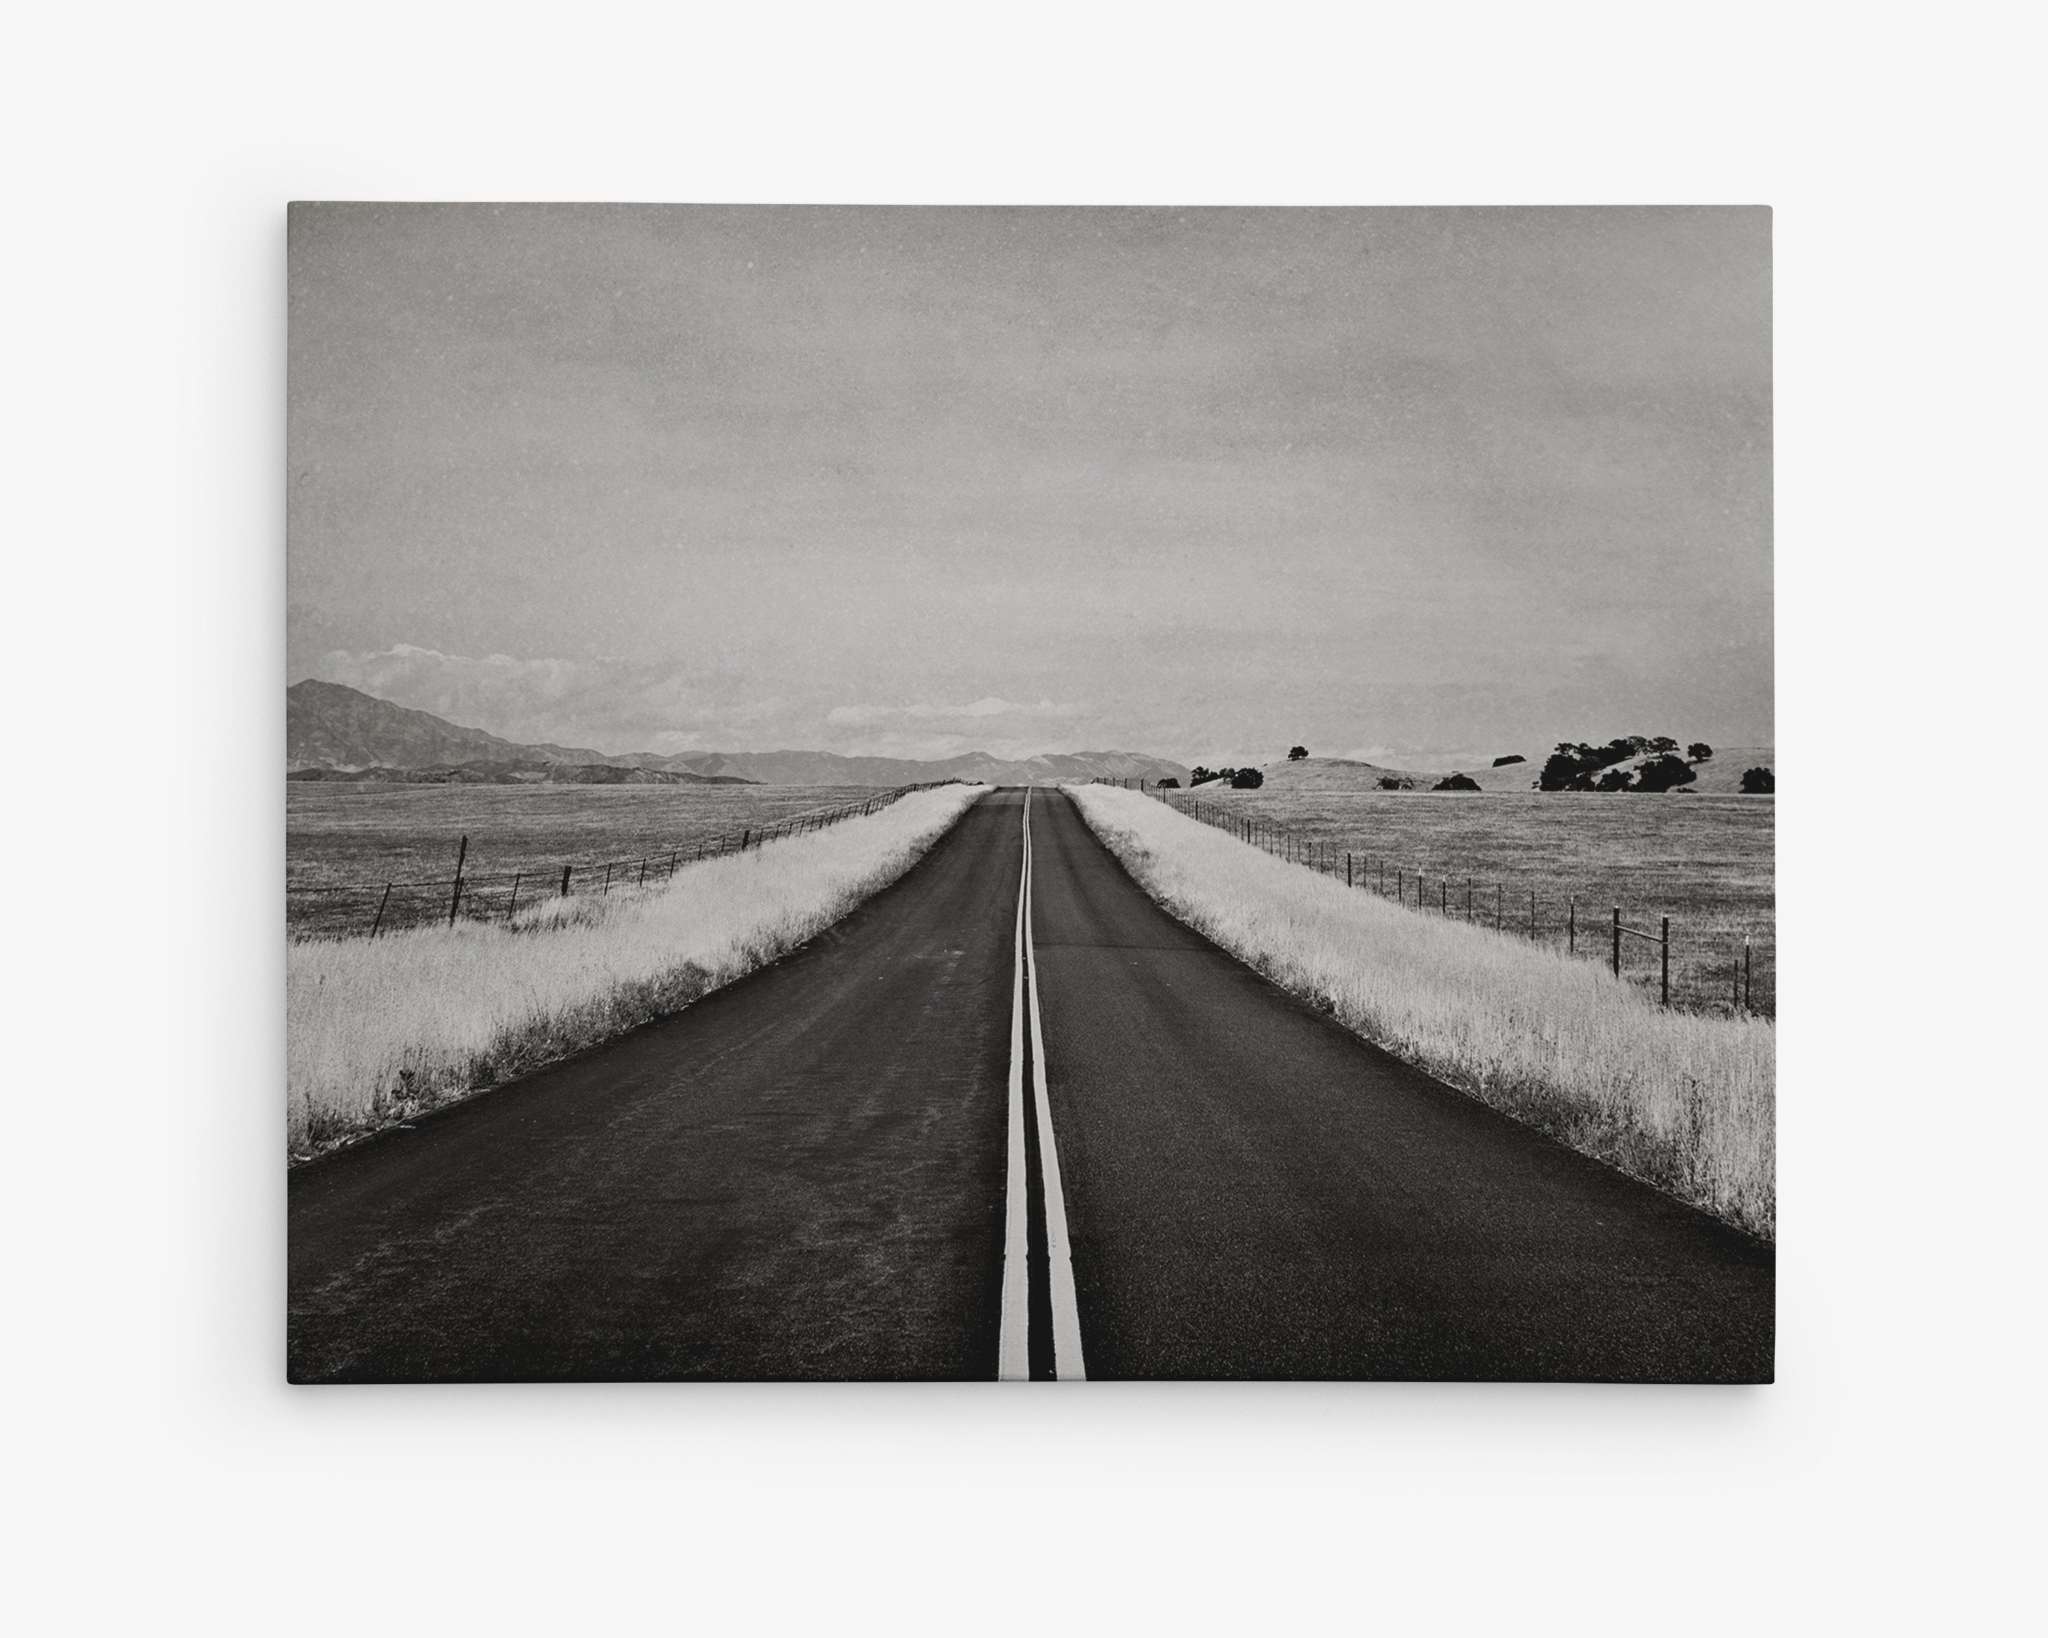 A black and white photograph of an empty, straight road stretching into the horizon. The road is flanked by fields of tall grass and sparse trees. Mountains are faintly visible in the distance under a cloudy sky, creating a serene and open landscape—perfect wall art for any space on premium artist-grade canvas. This is Offley Green's Black and White Rural Landscape Canvas Art, 'American Road Trip.'